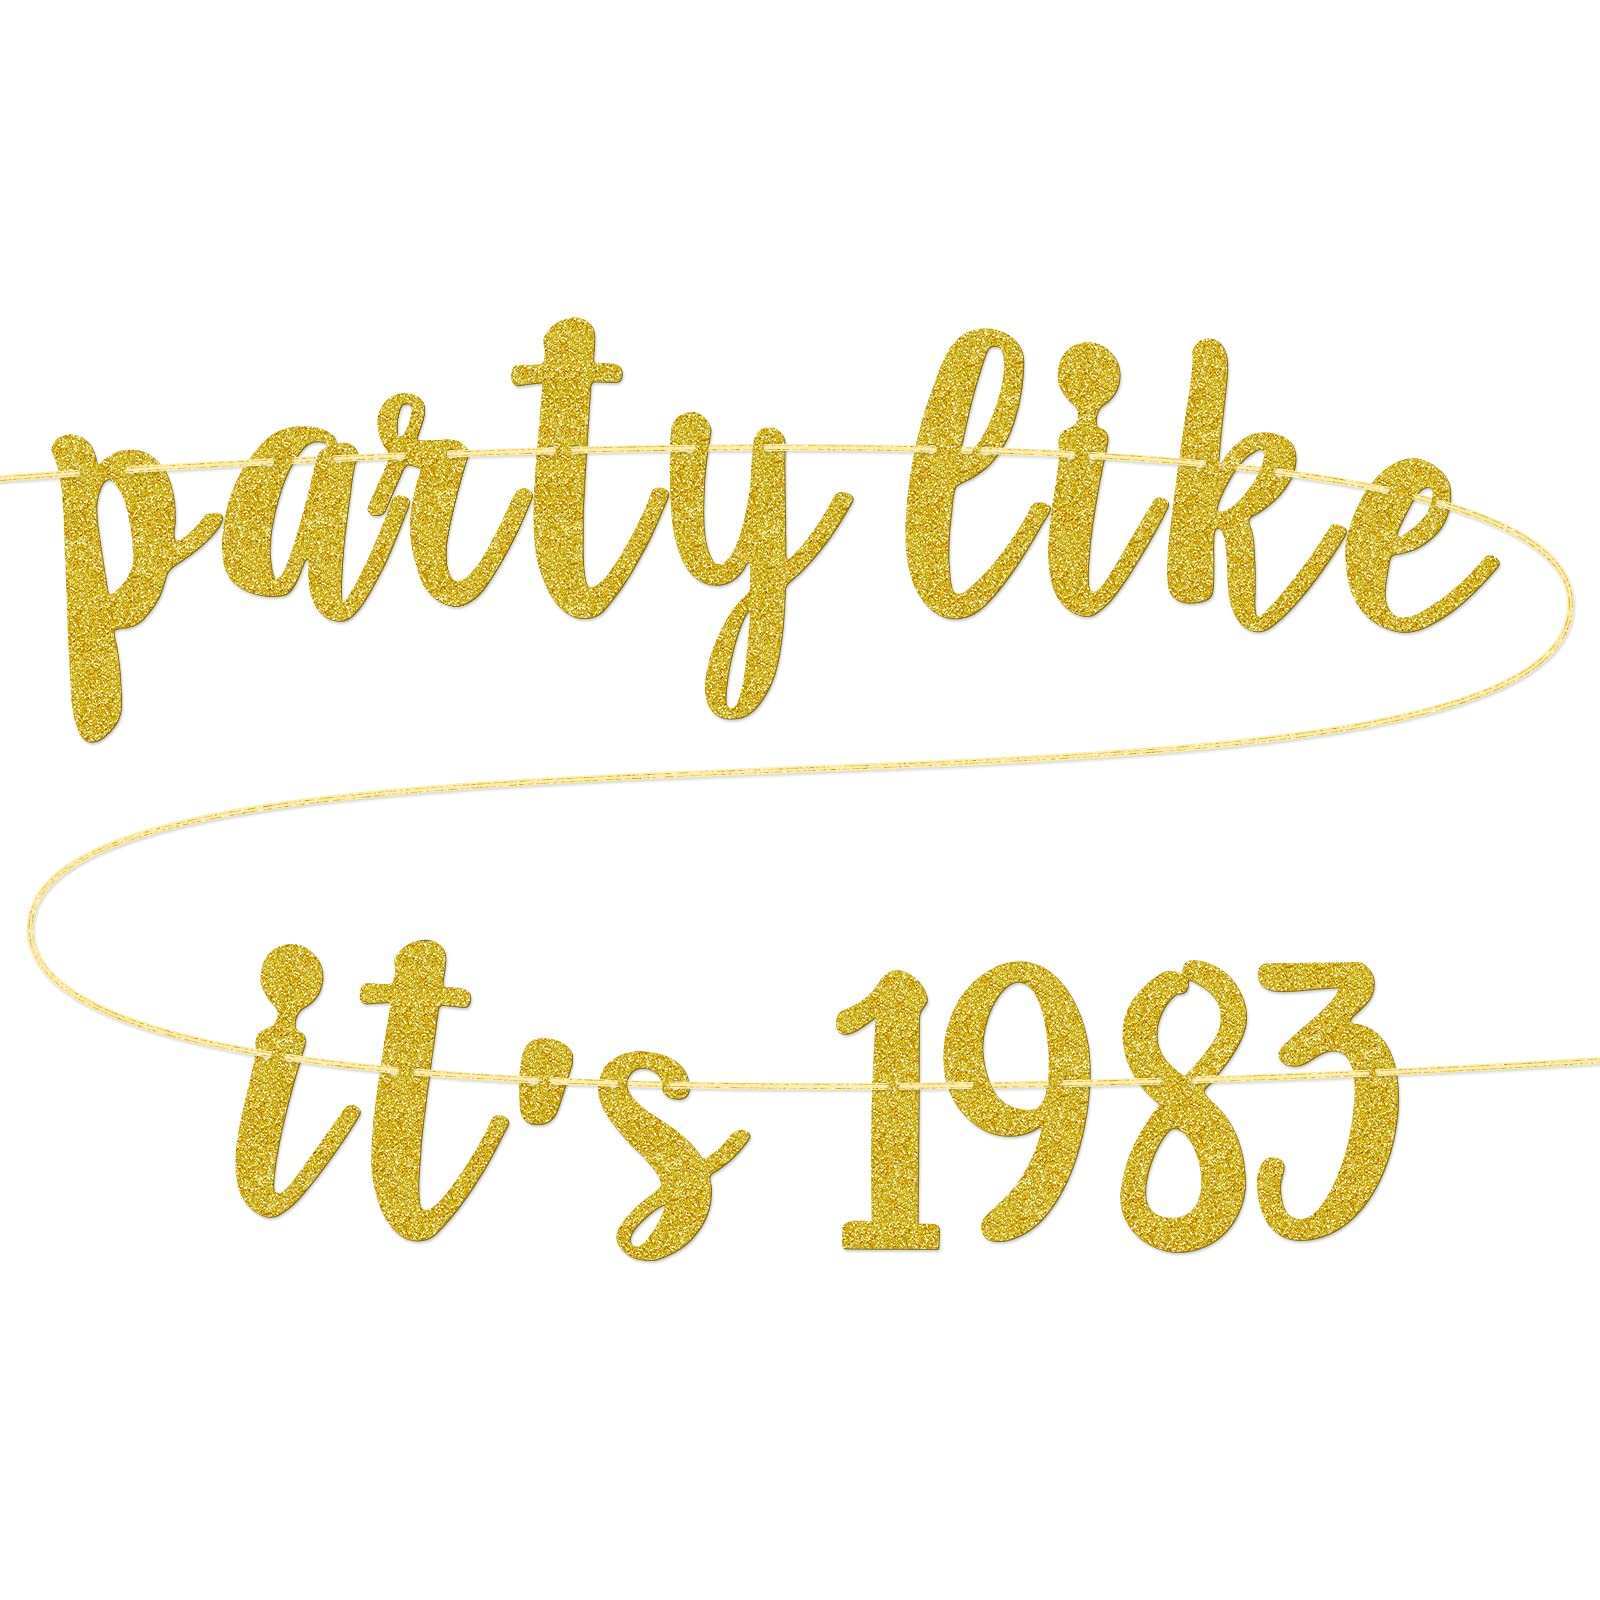 Party Like It's 1983 Banner, 41st Birthday Anniversary Party Decorations, Back in 1983 Birthday Decoration, Pre-Strung, Gold Glitter